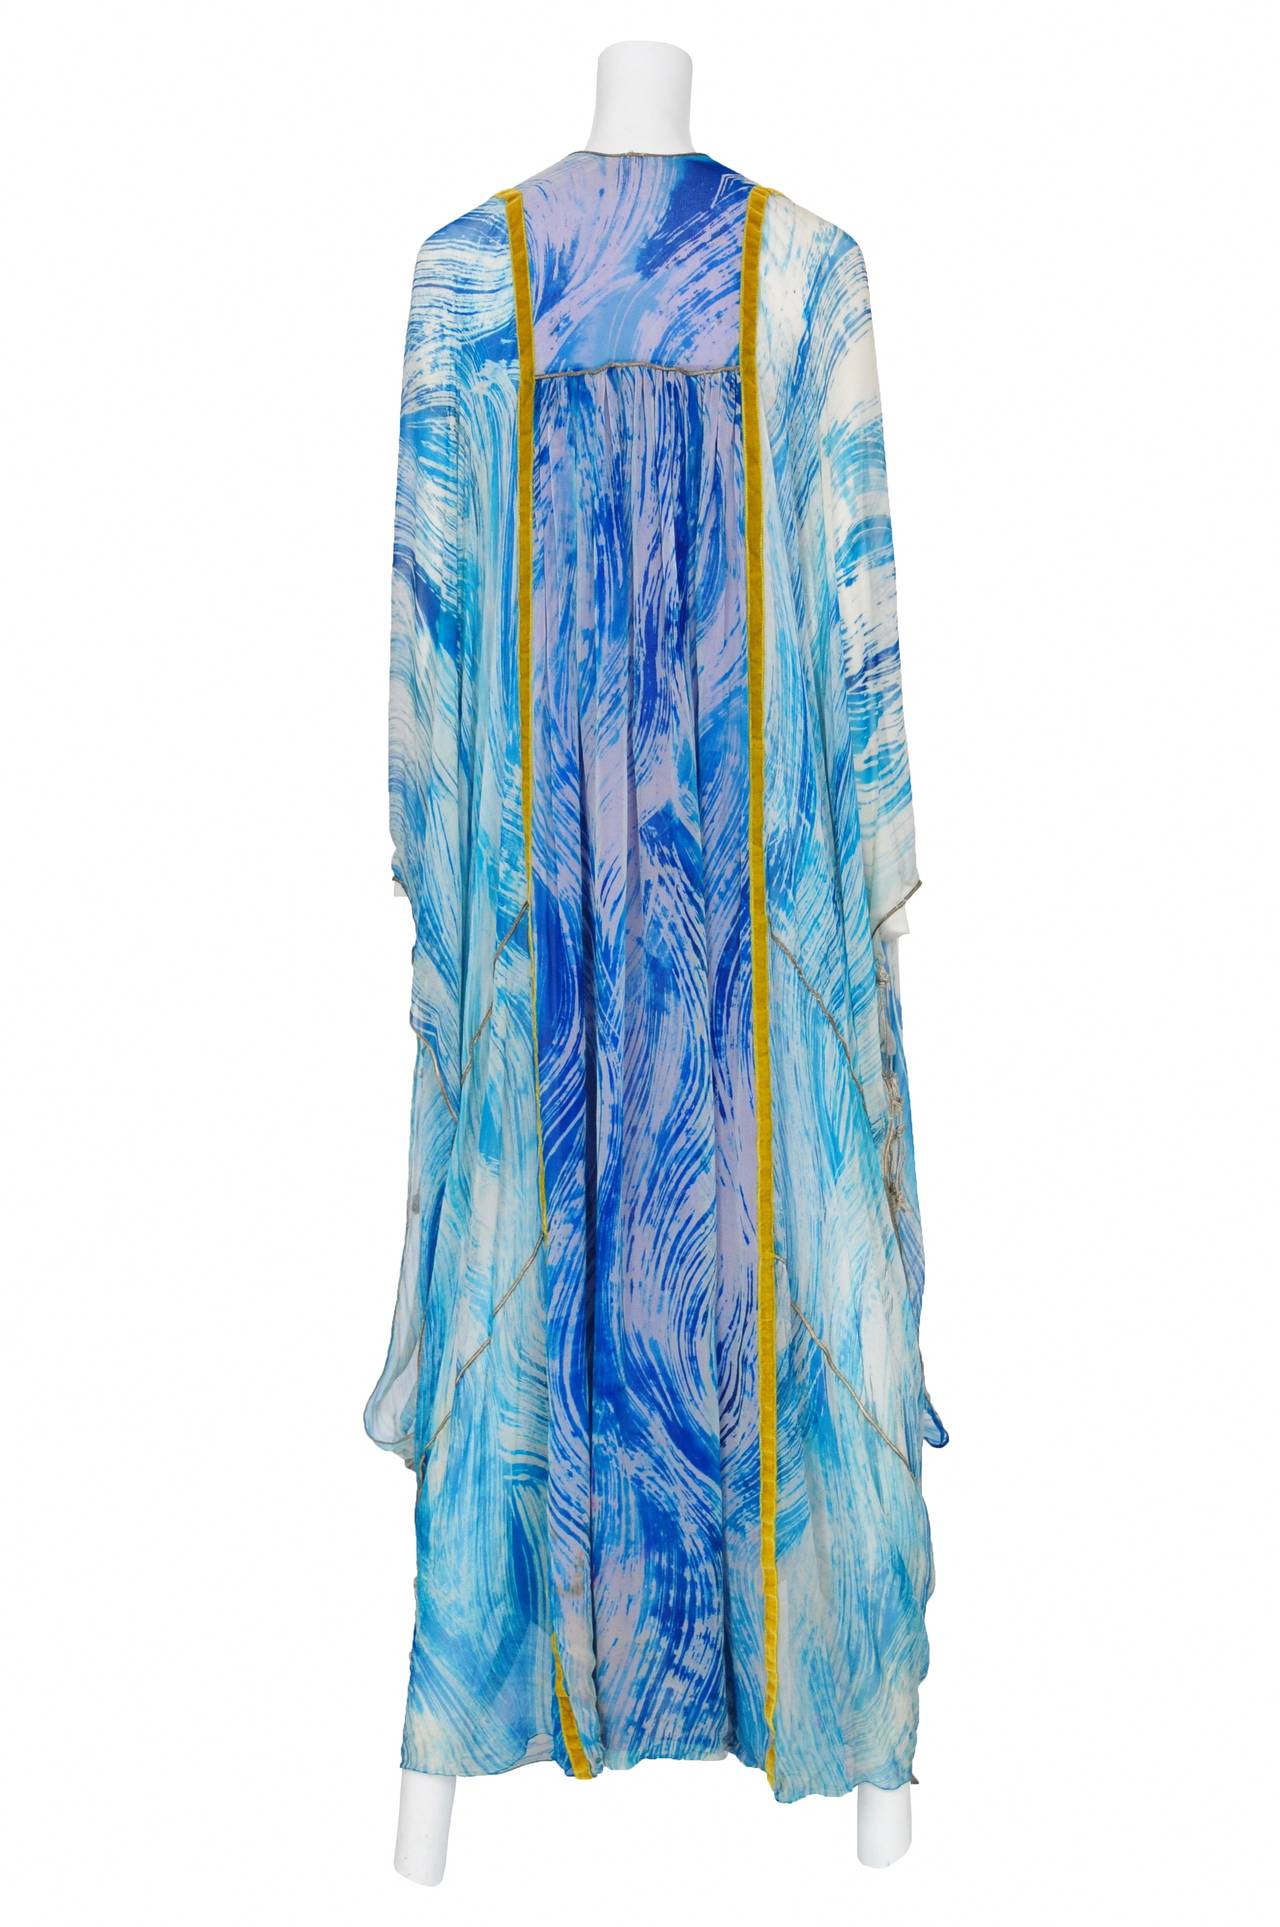 Vintage Thea Porter blue brush stroke print chiffon caftan featuring blue sequin detail at the yoke as well as various patchwork throughout accompanied with gold piping throughout patchwork and along sleeve edges.
Please inquire for additional